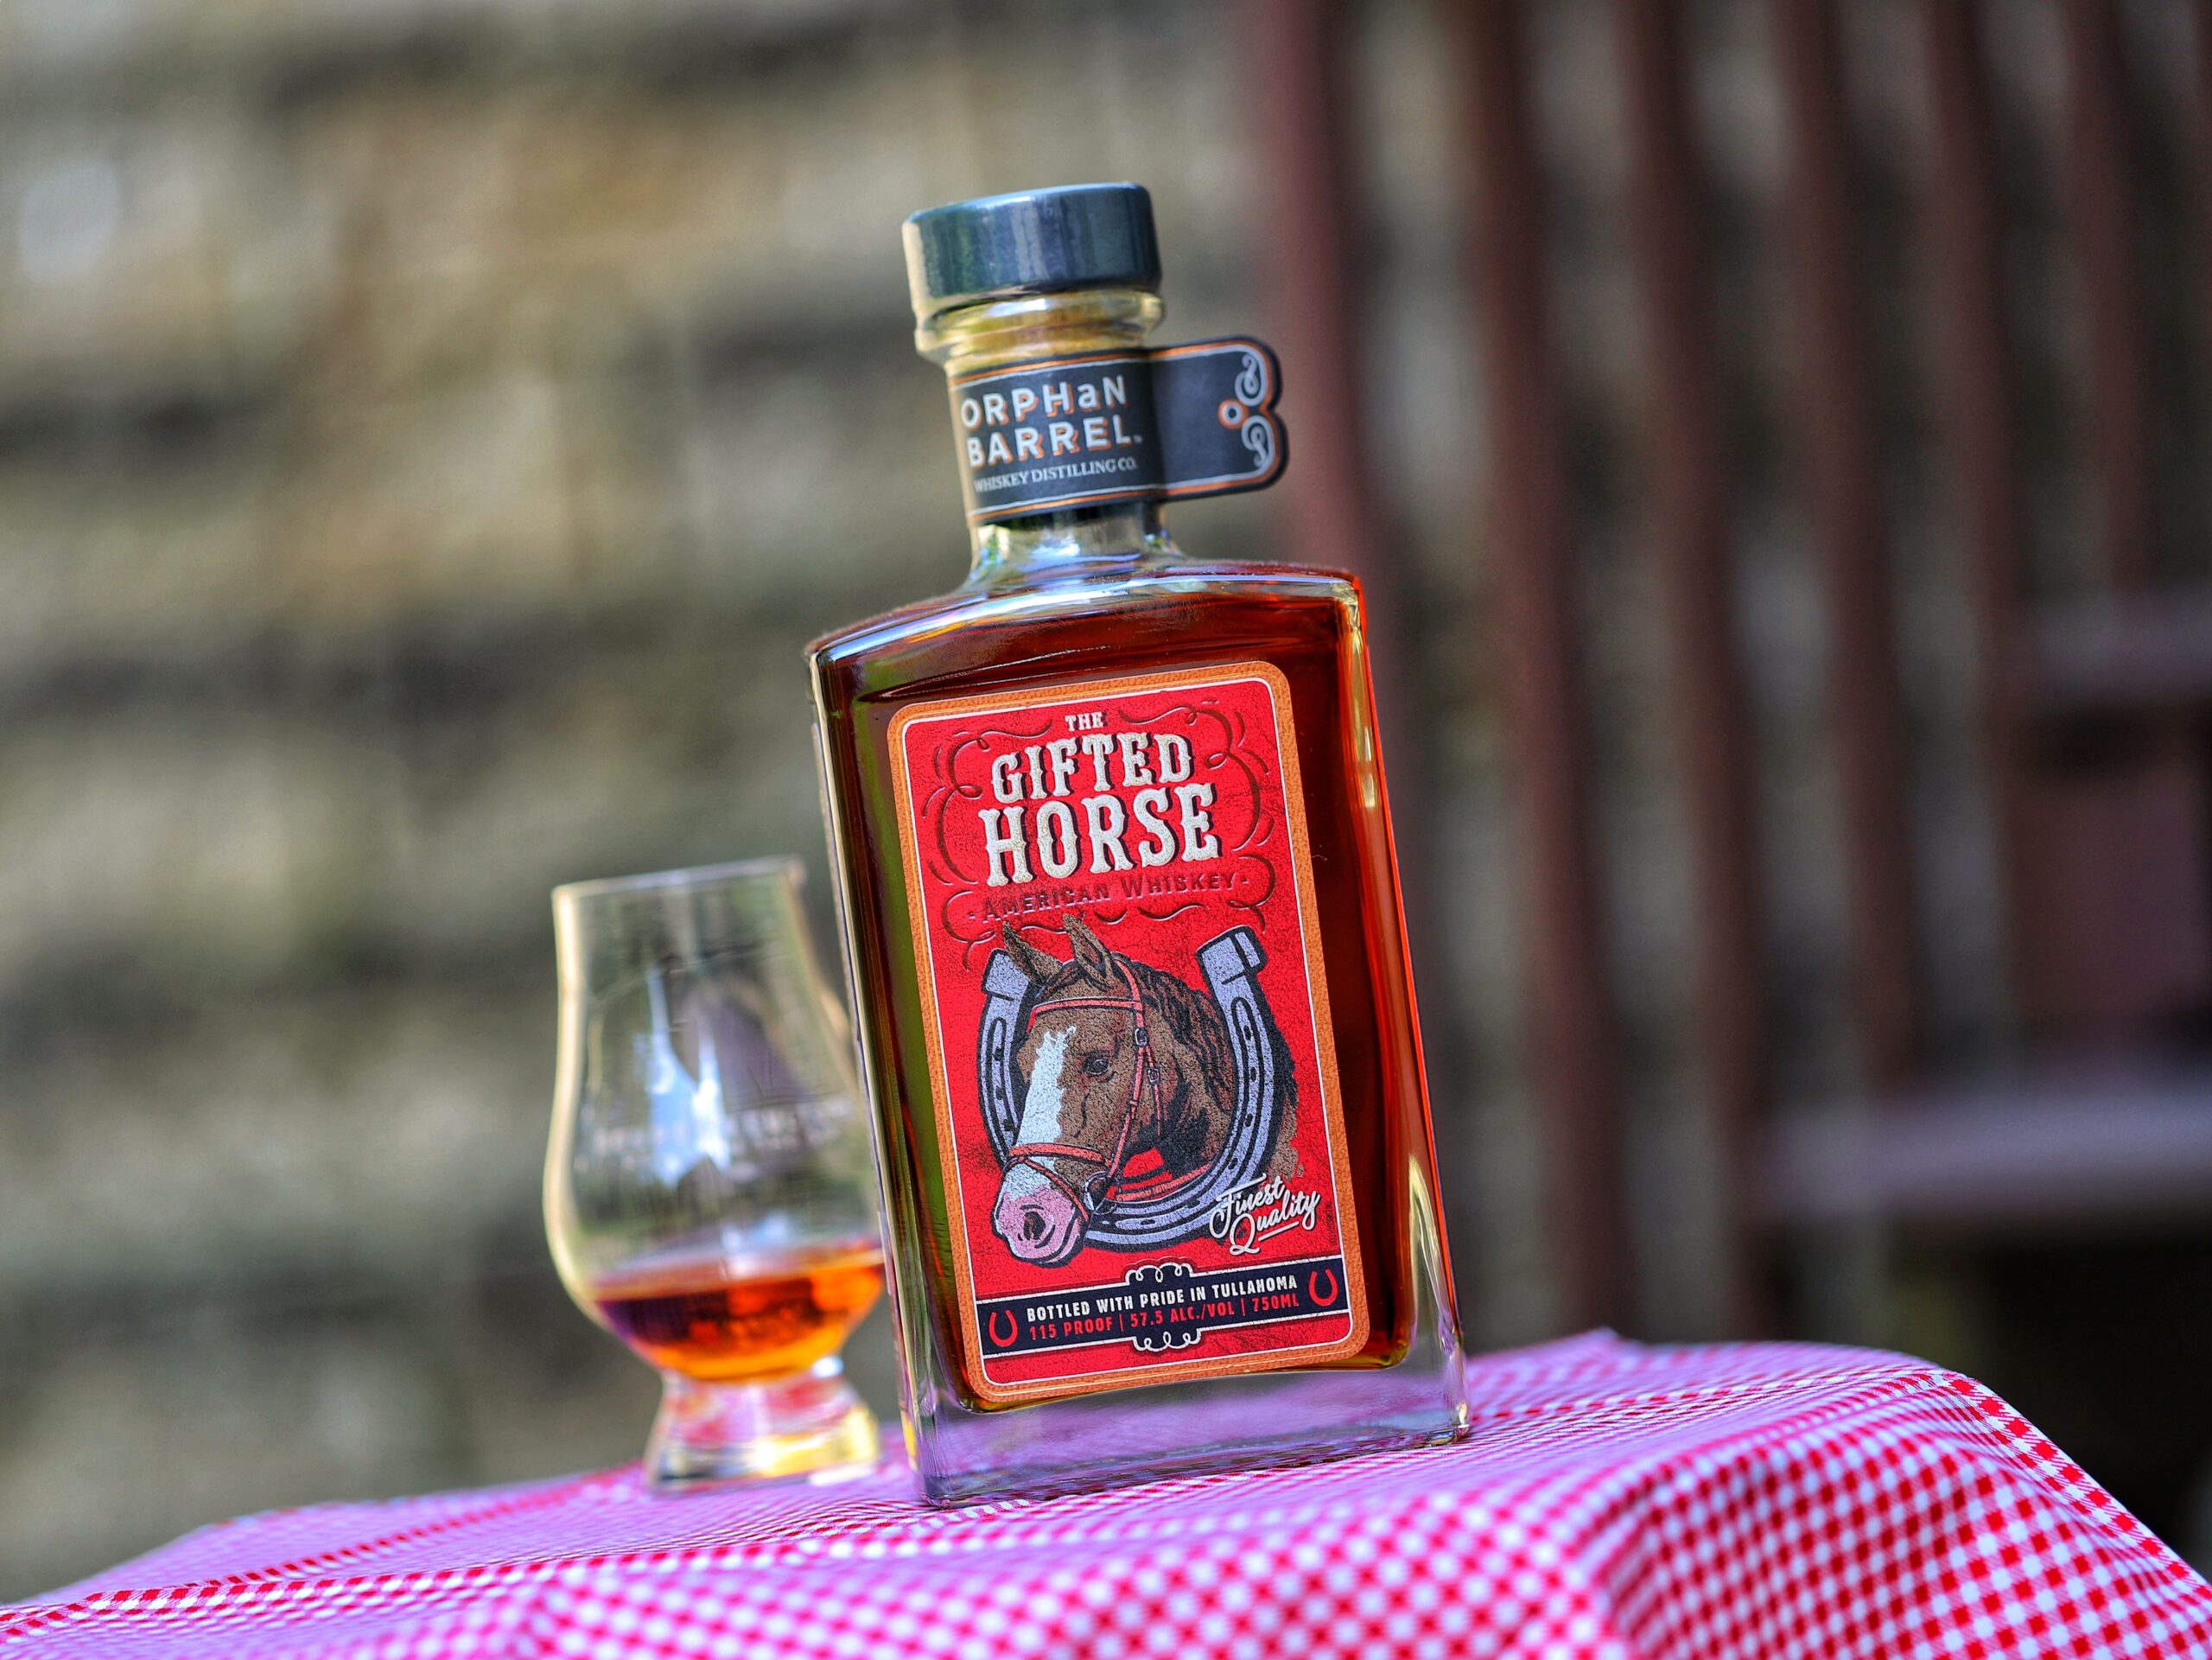 Orphan Barrel The Gifted Horse Review